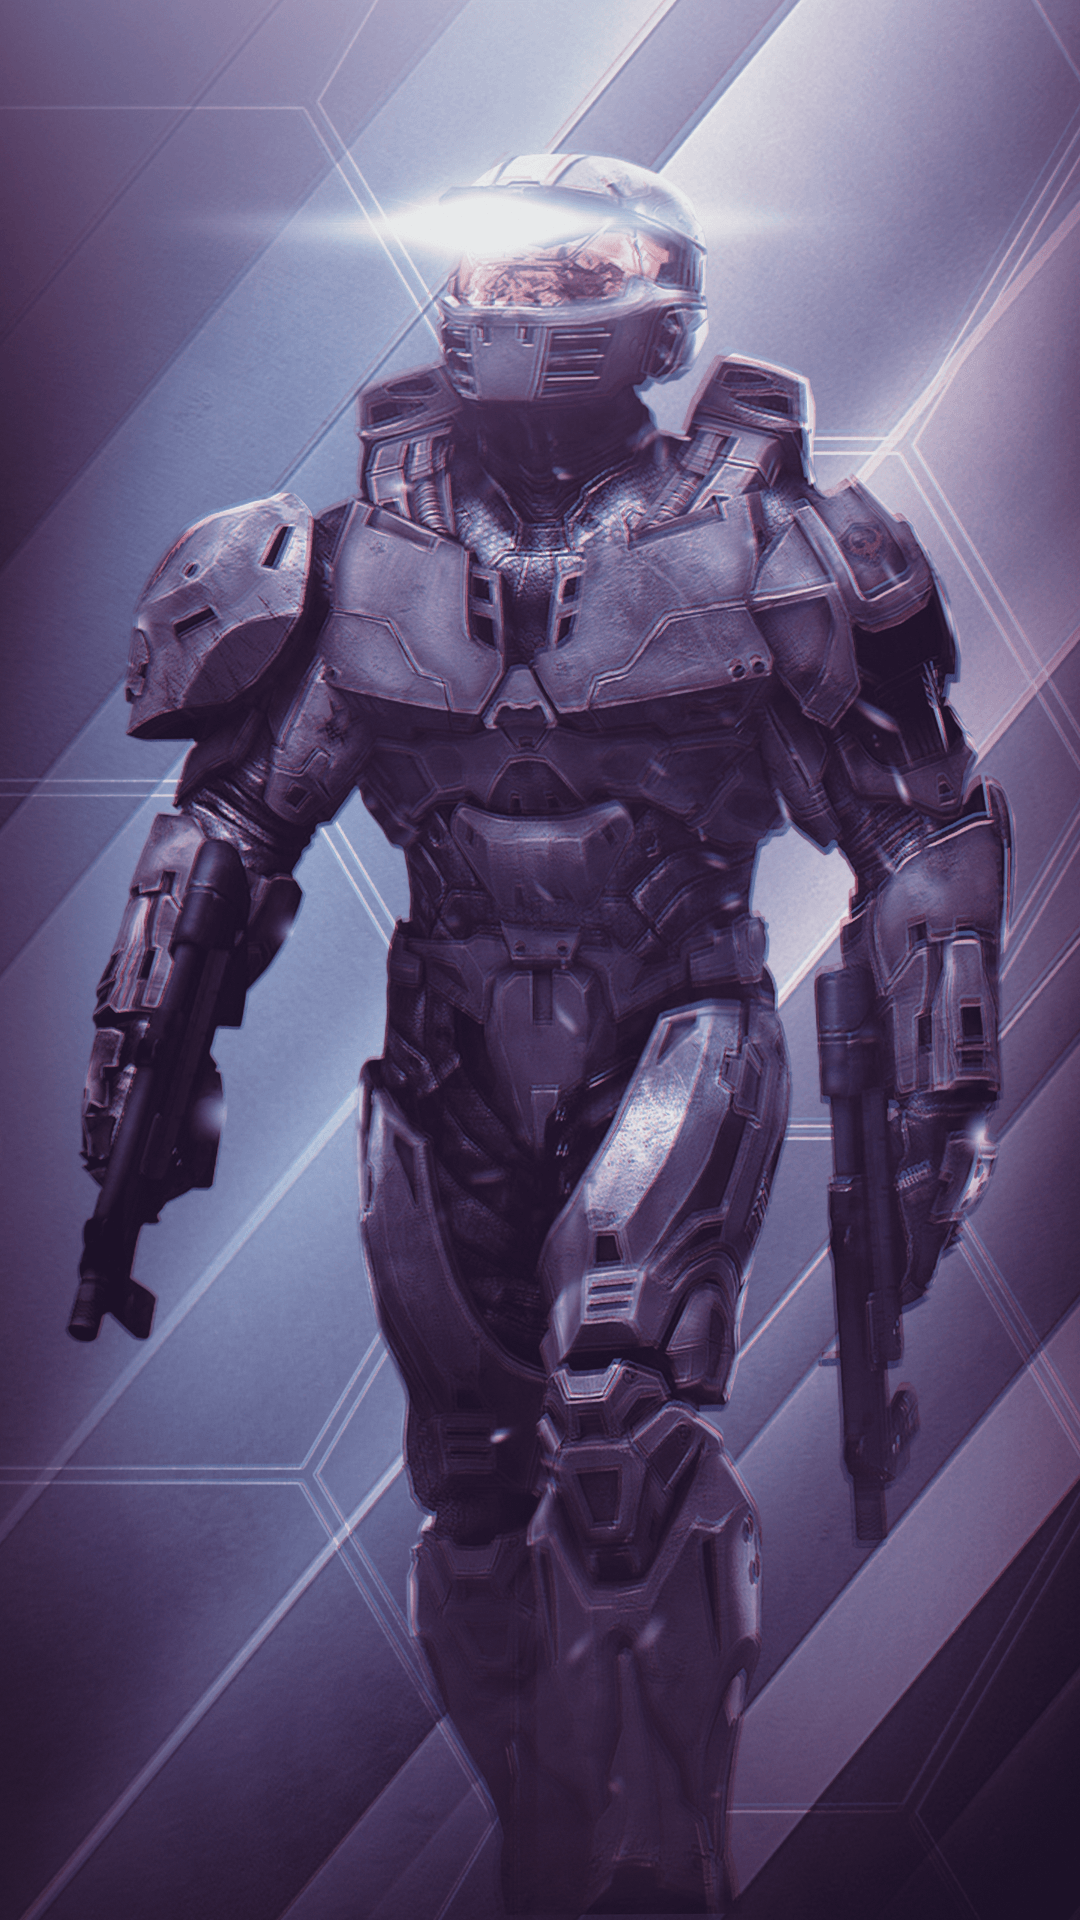 I made a lil Halo Phone Wallpaper